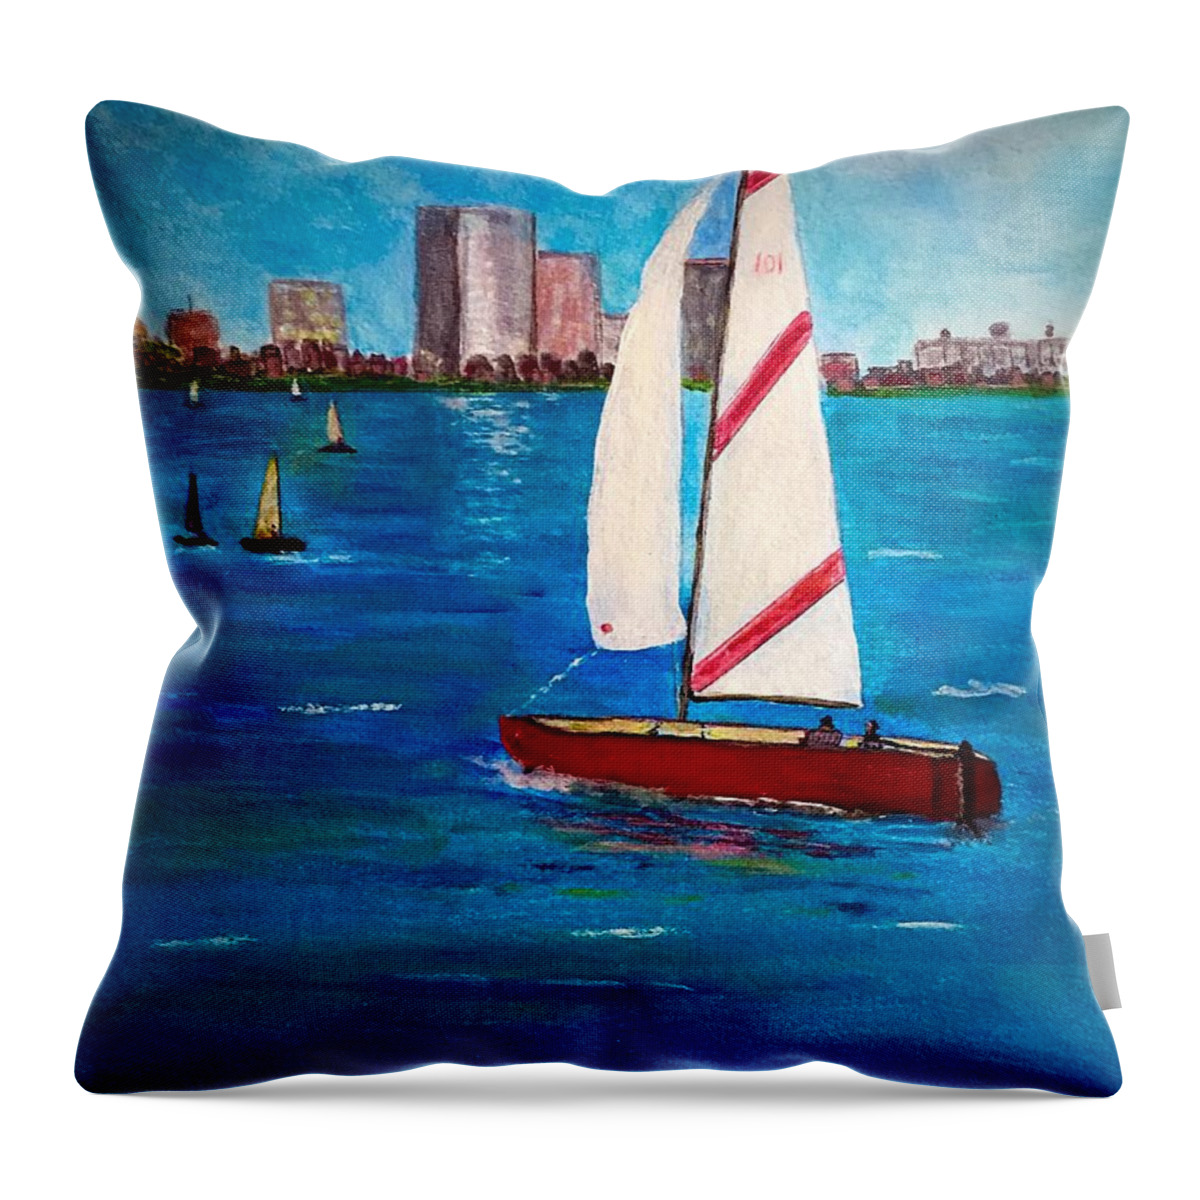 Charles River Throw Pillow featuring the painting Sailing on the Charles by Anne Sands